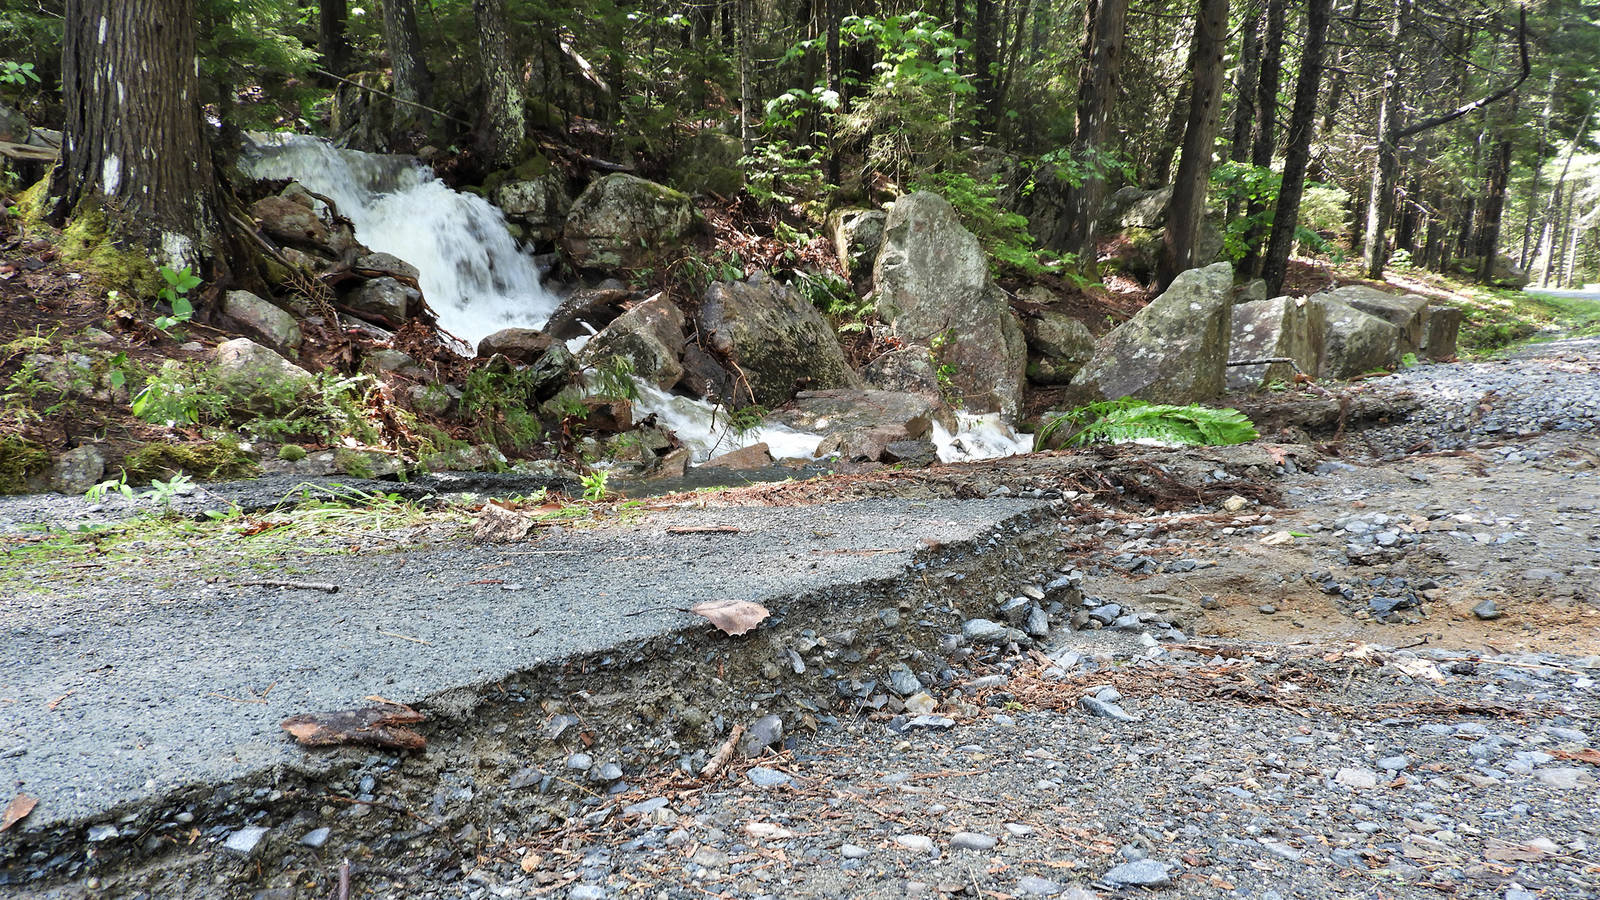 <p>Acadia’s historic carriage roads sustained extensive damage following a severe rainstorm in June 2021 which closed 10 miles of the 45-mile carriage road network in the park.</p>